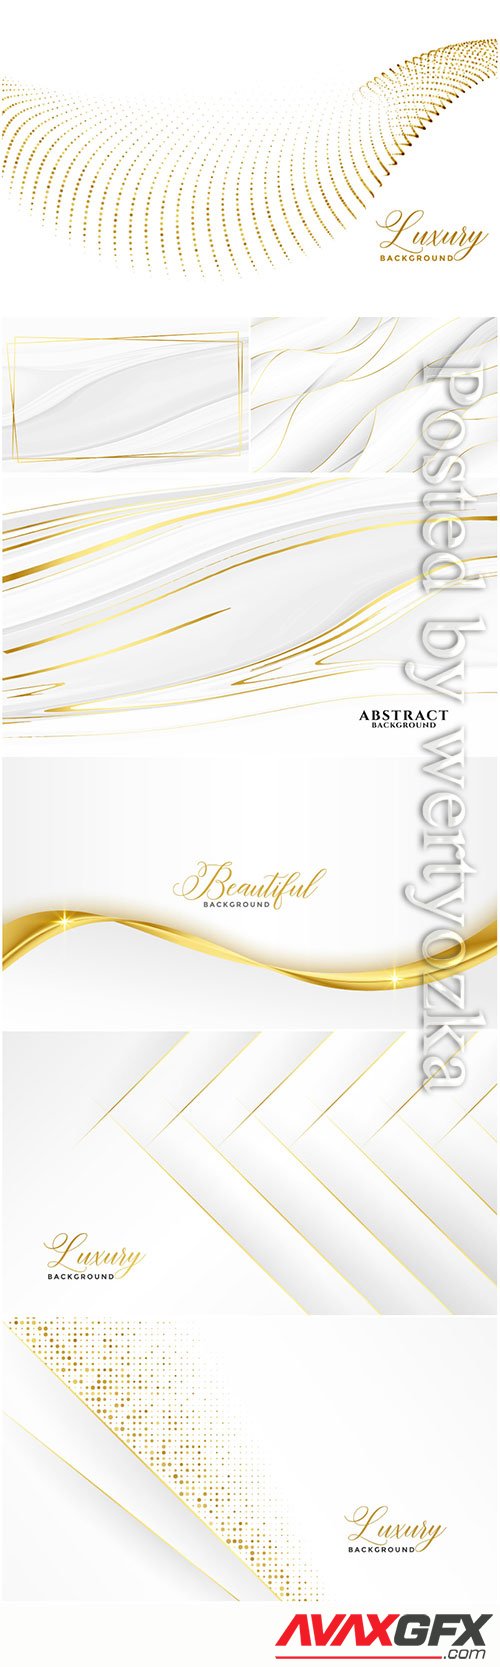 White vector backgrounds with gold decor